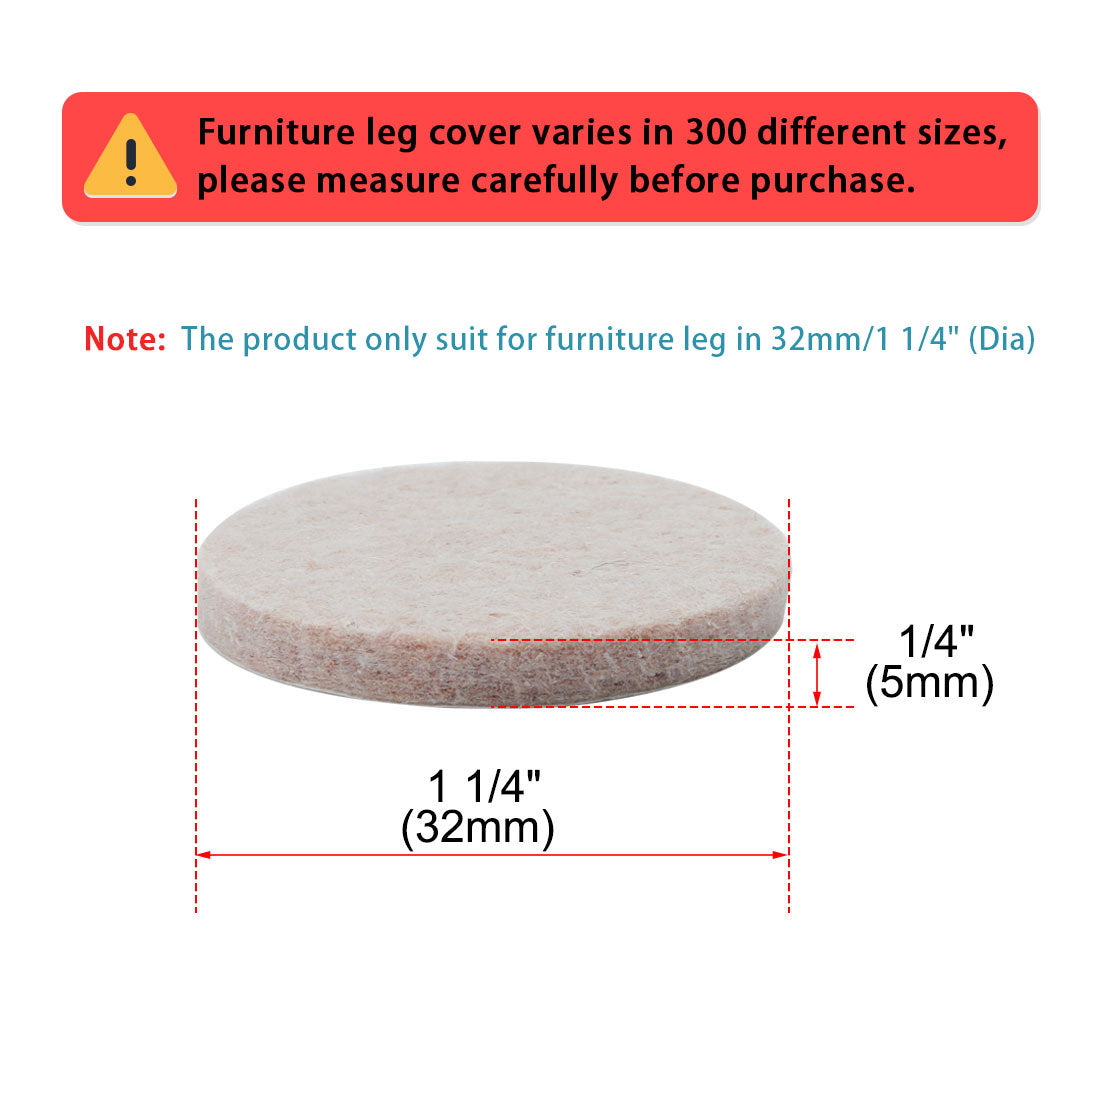 uxcell Uxcell Felt Furniture Pad Round 1 1/4" Self Adhesive Anti-scratch Chair Protector 50pcs